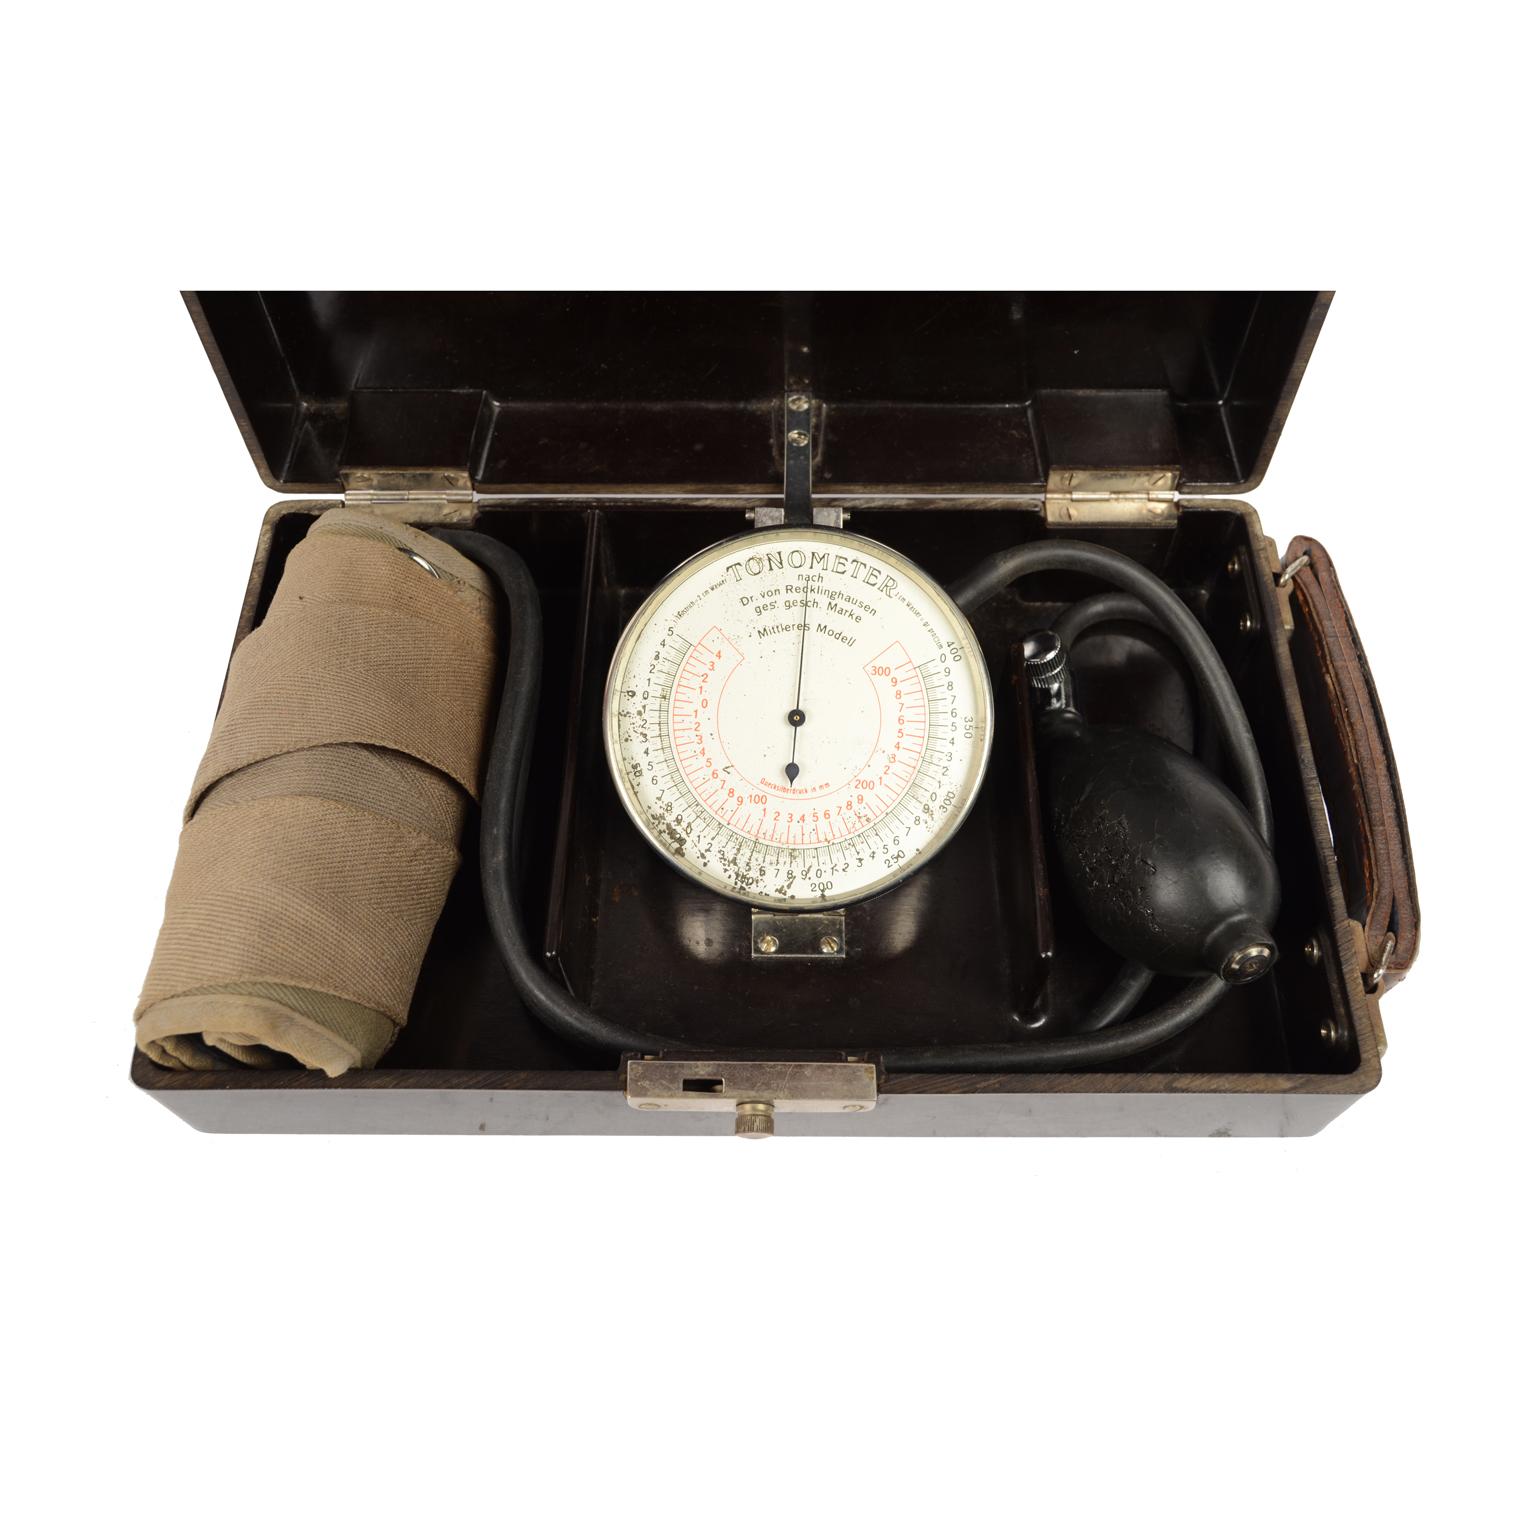 Medium model sphygmomanometer, a blood pressure meter invented by Dr. Recklinghaussen. The instrument is in its original Bakelite box. German manufacture of the 1930s. Good condition, the rubber parts have hardened over time. Box size cm 25.5 x 15.5